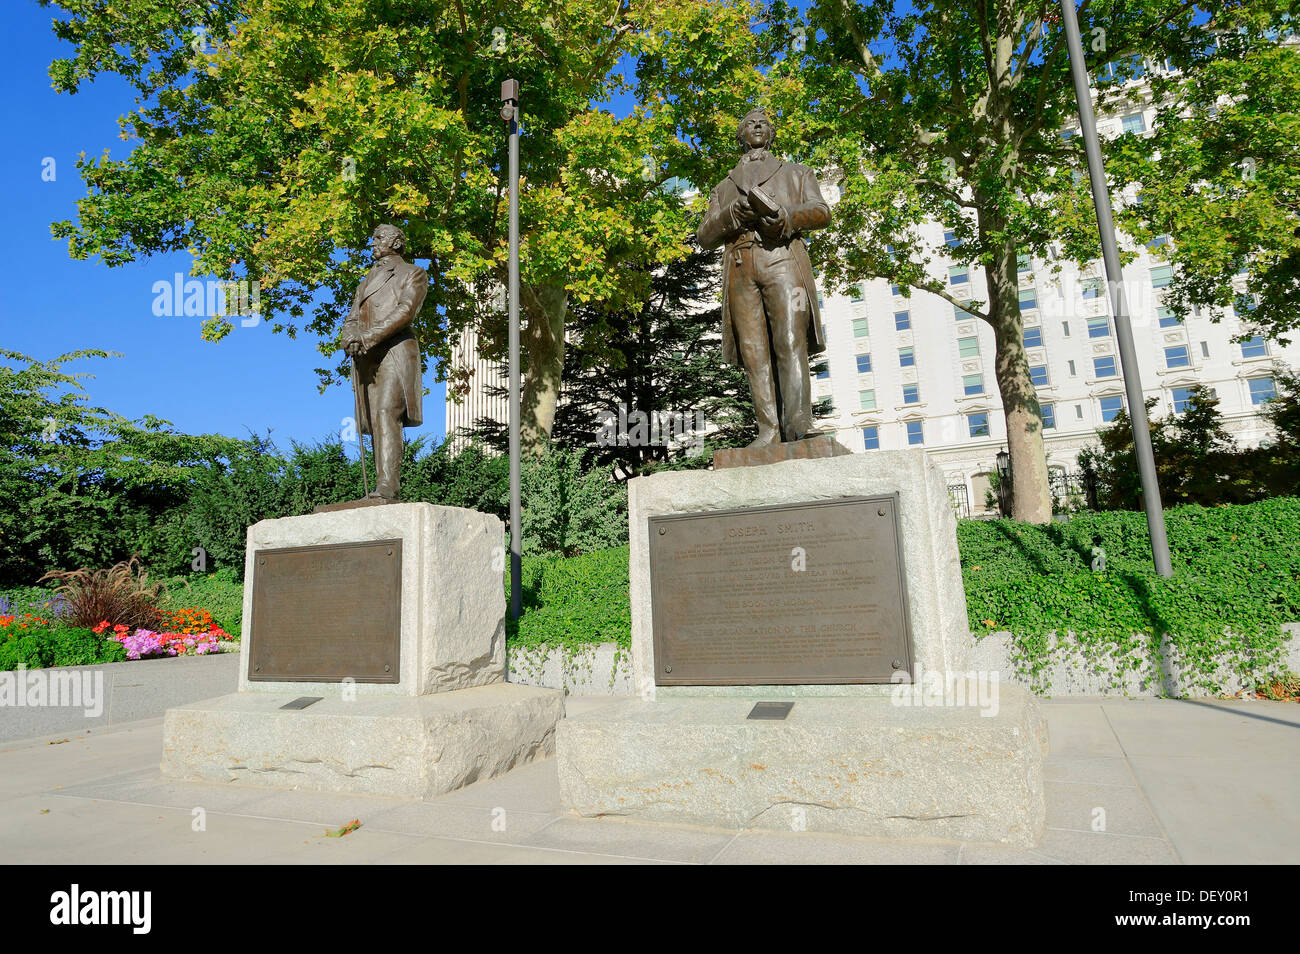 Statues of Hyrum Smith and Joseph Smith, founders of the Church of Jesus Christ of Latter-day Saints, Temple Square Stock Photo